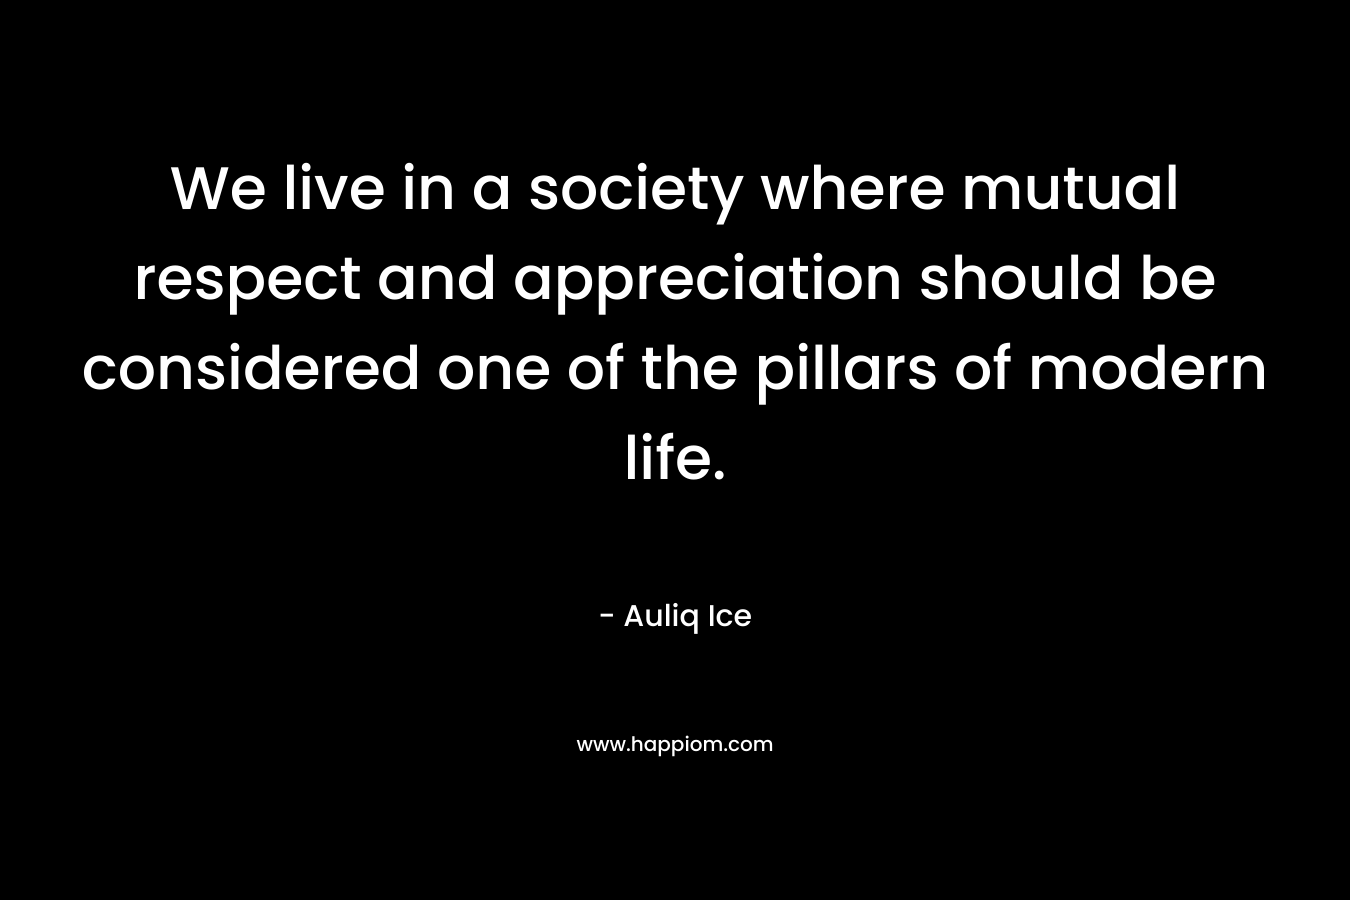 We live in a society where mutual respect and appreciation should be considered one of the pillars of modern life. – Auliq Ice